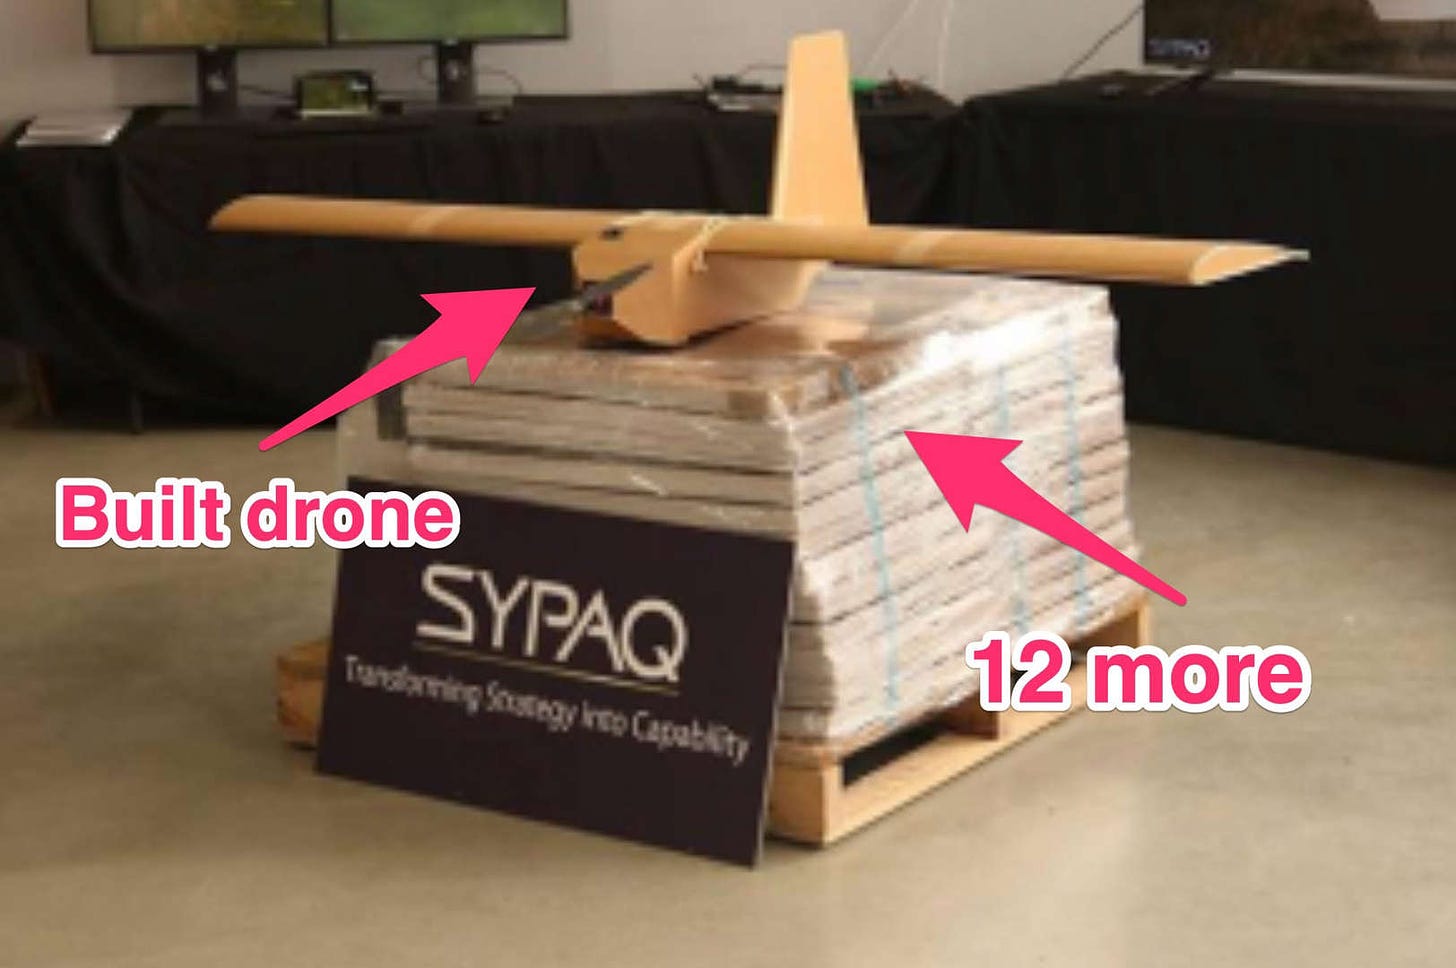 A constructed SYPAQ Corvo PPDS drone, sitting atop a stack of flat-packed ones. Two arrows point to both, saying